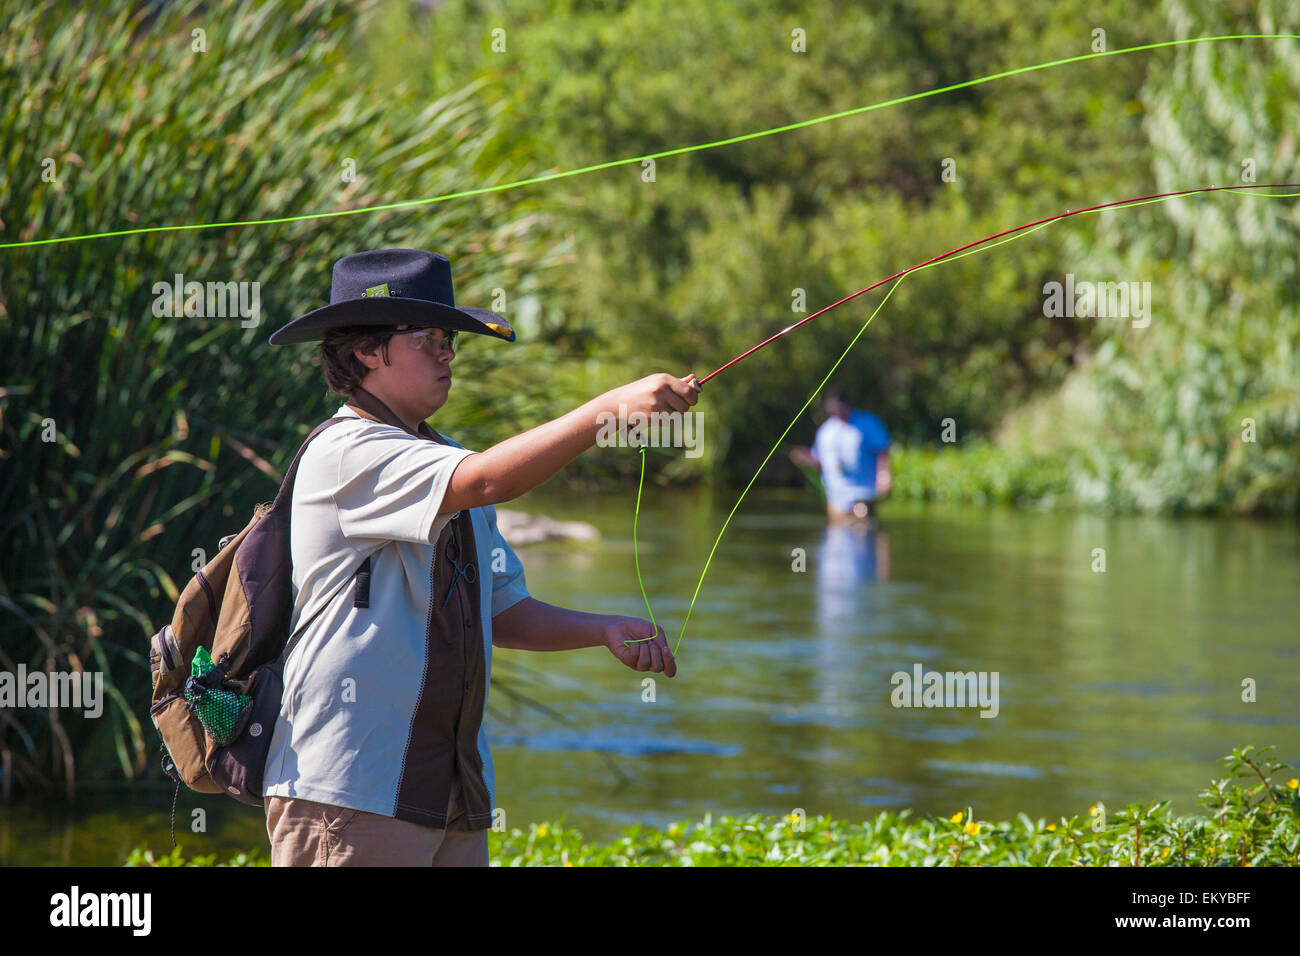 Kids and those wishing to learn to fish attend The first annual Off tha’ Hook fly fishing event, Los Angeles River Stock Photo